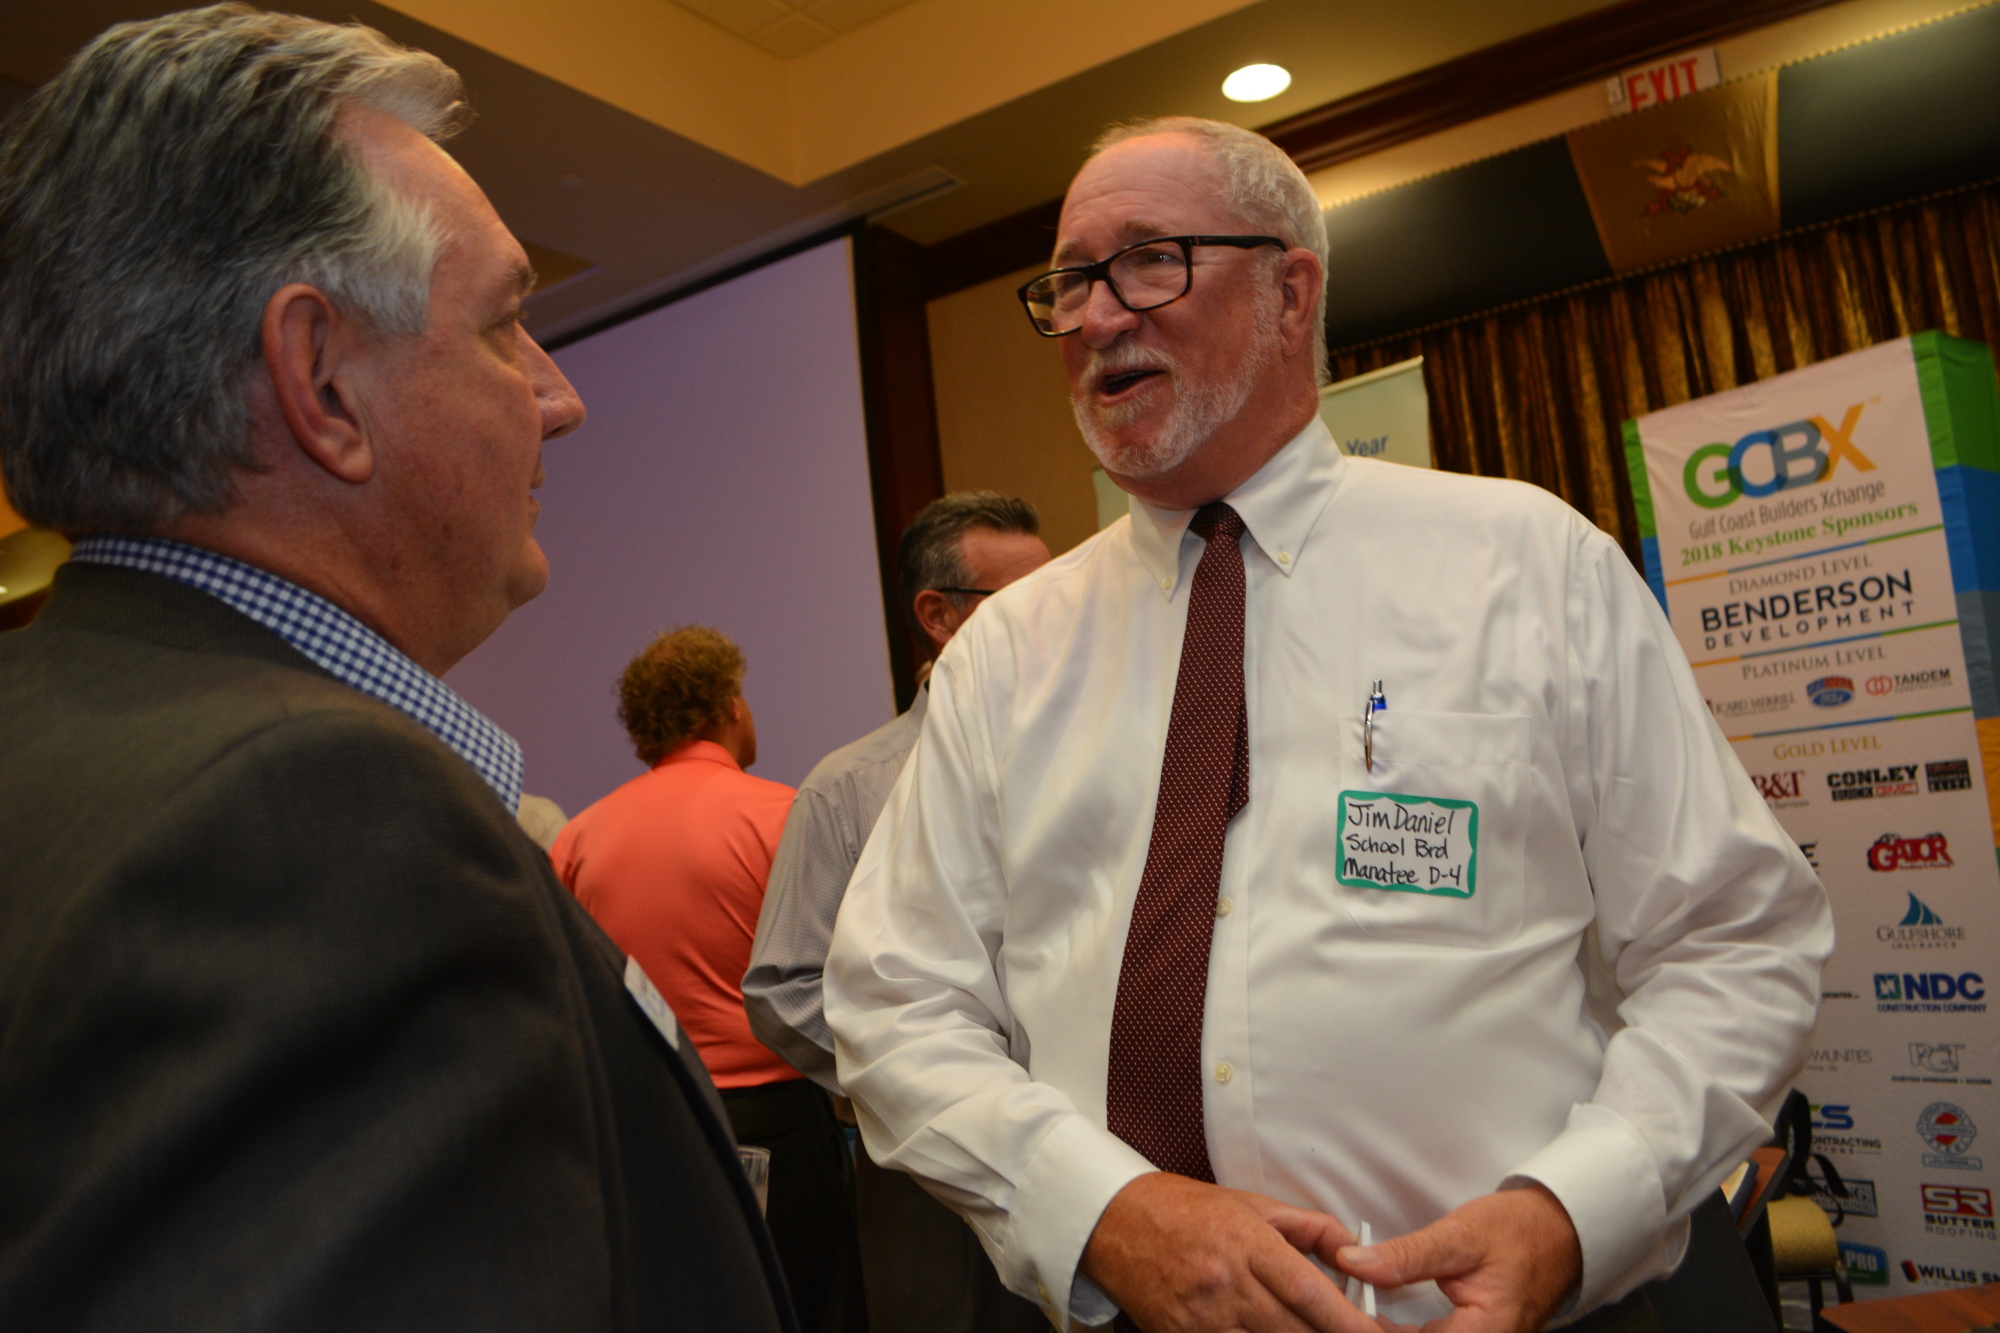 Manatee County School Board candidate Jim Daniel, right, talks with guests about his vision.